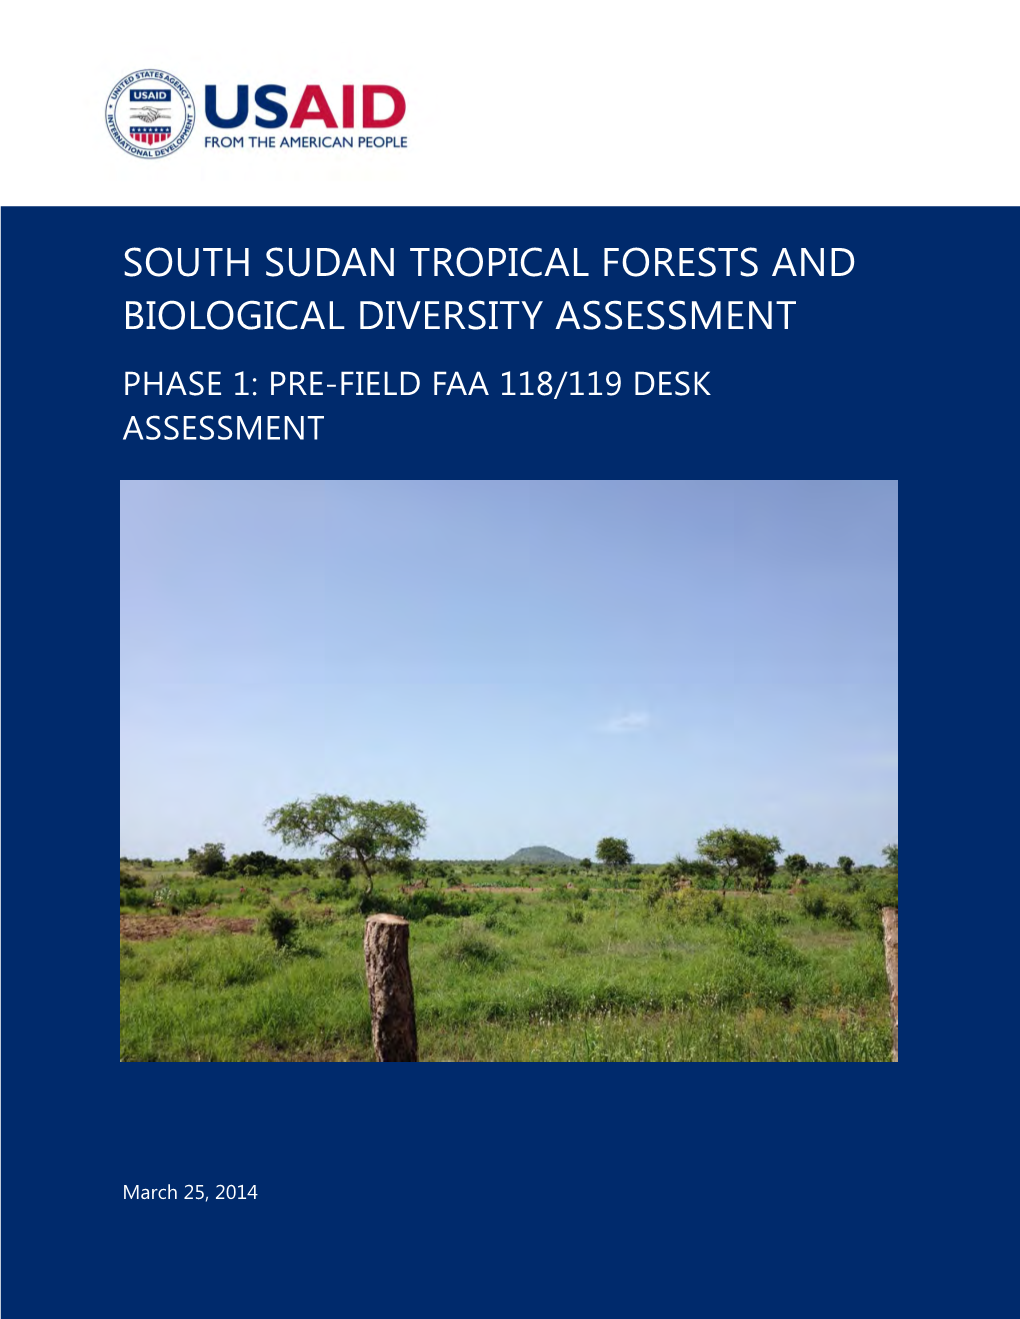 South Sudan Tropical Forests and Biological Diversity Assessment Phase 1: Pre-Field Faa 118/119 Desk Assessment